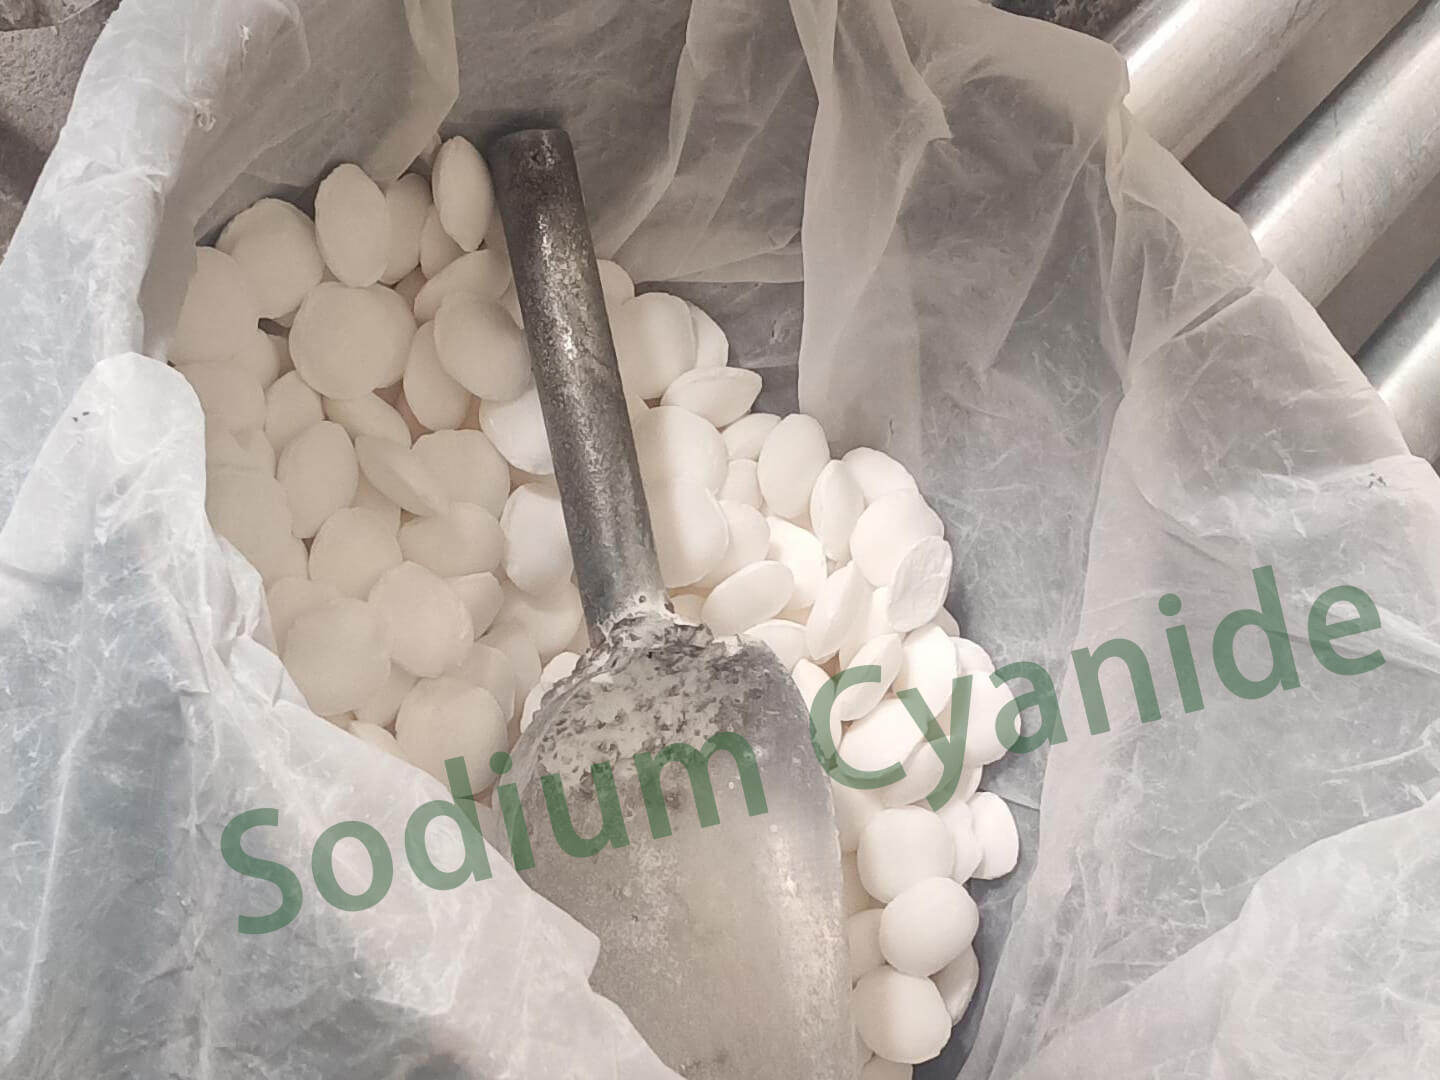 Sodium cyanide - When using cyanide, how can you be sure that it is safe and effective?